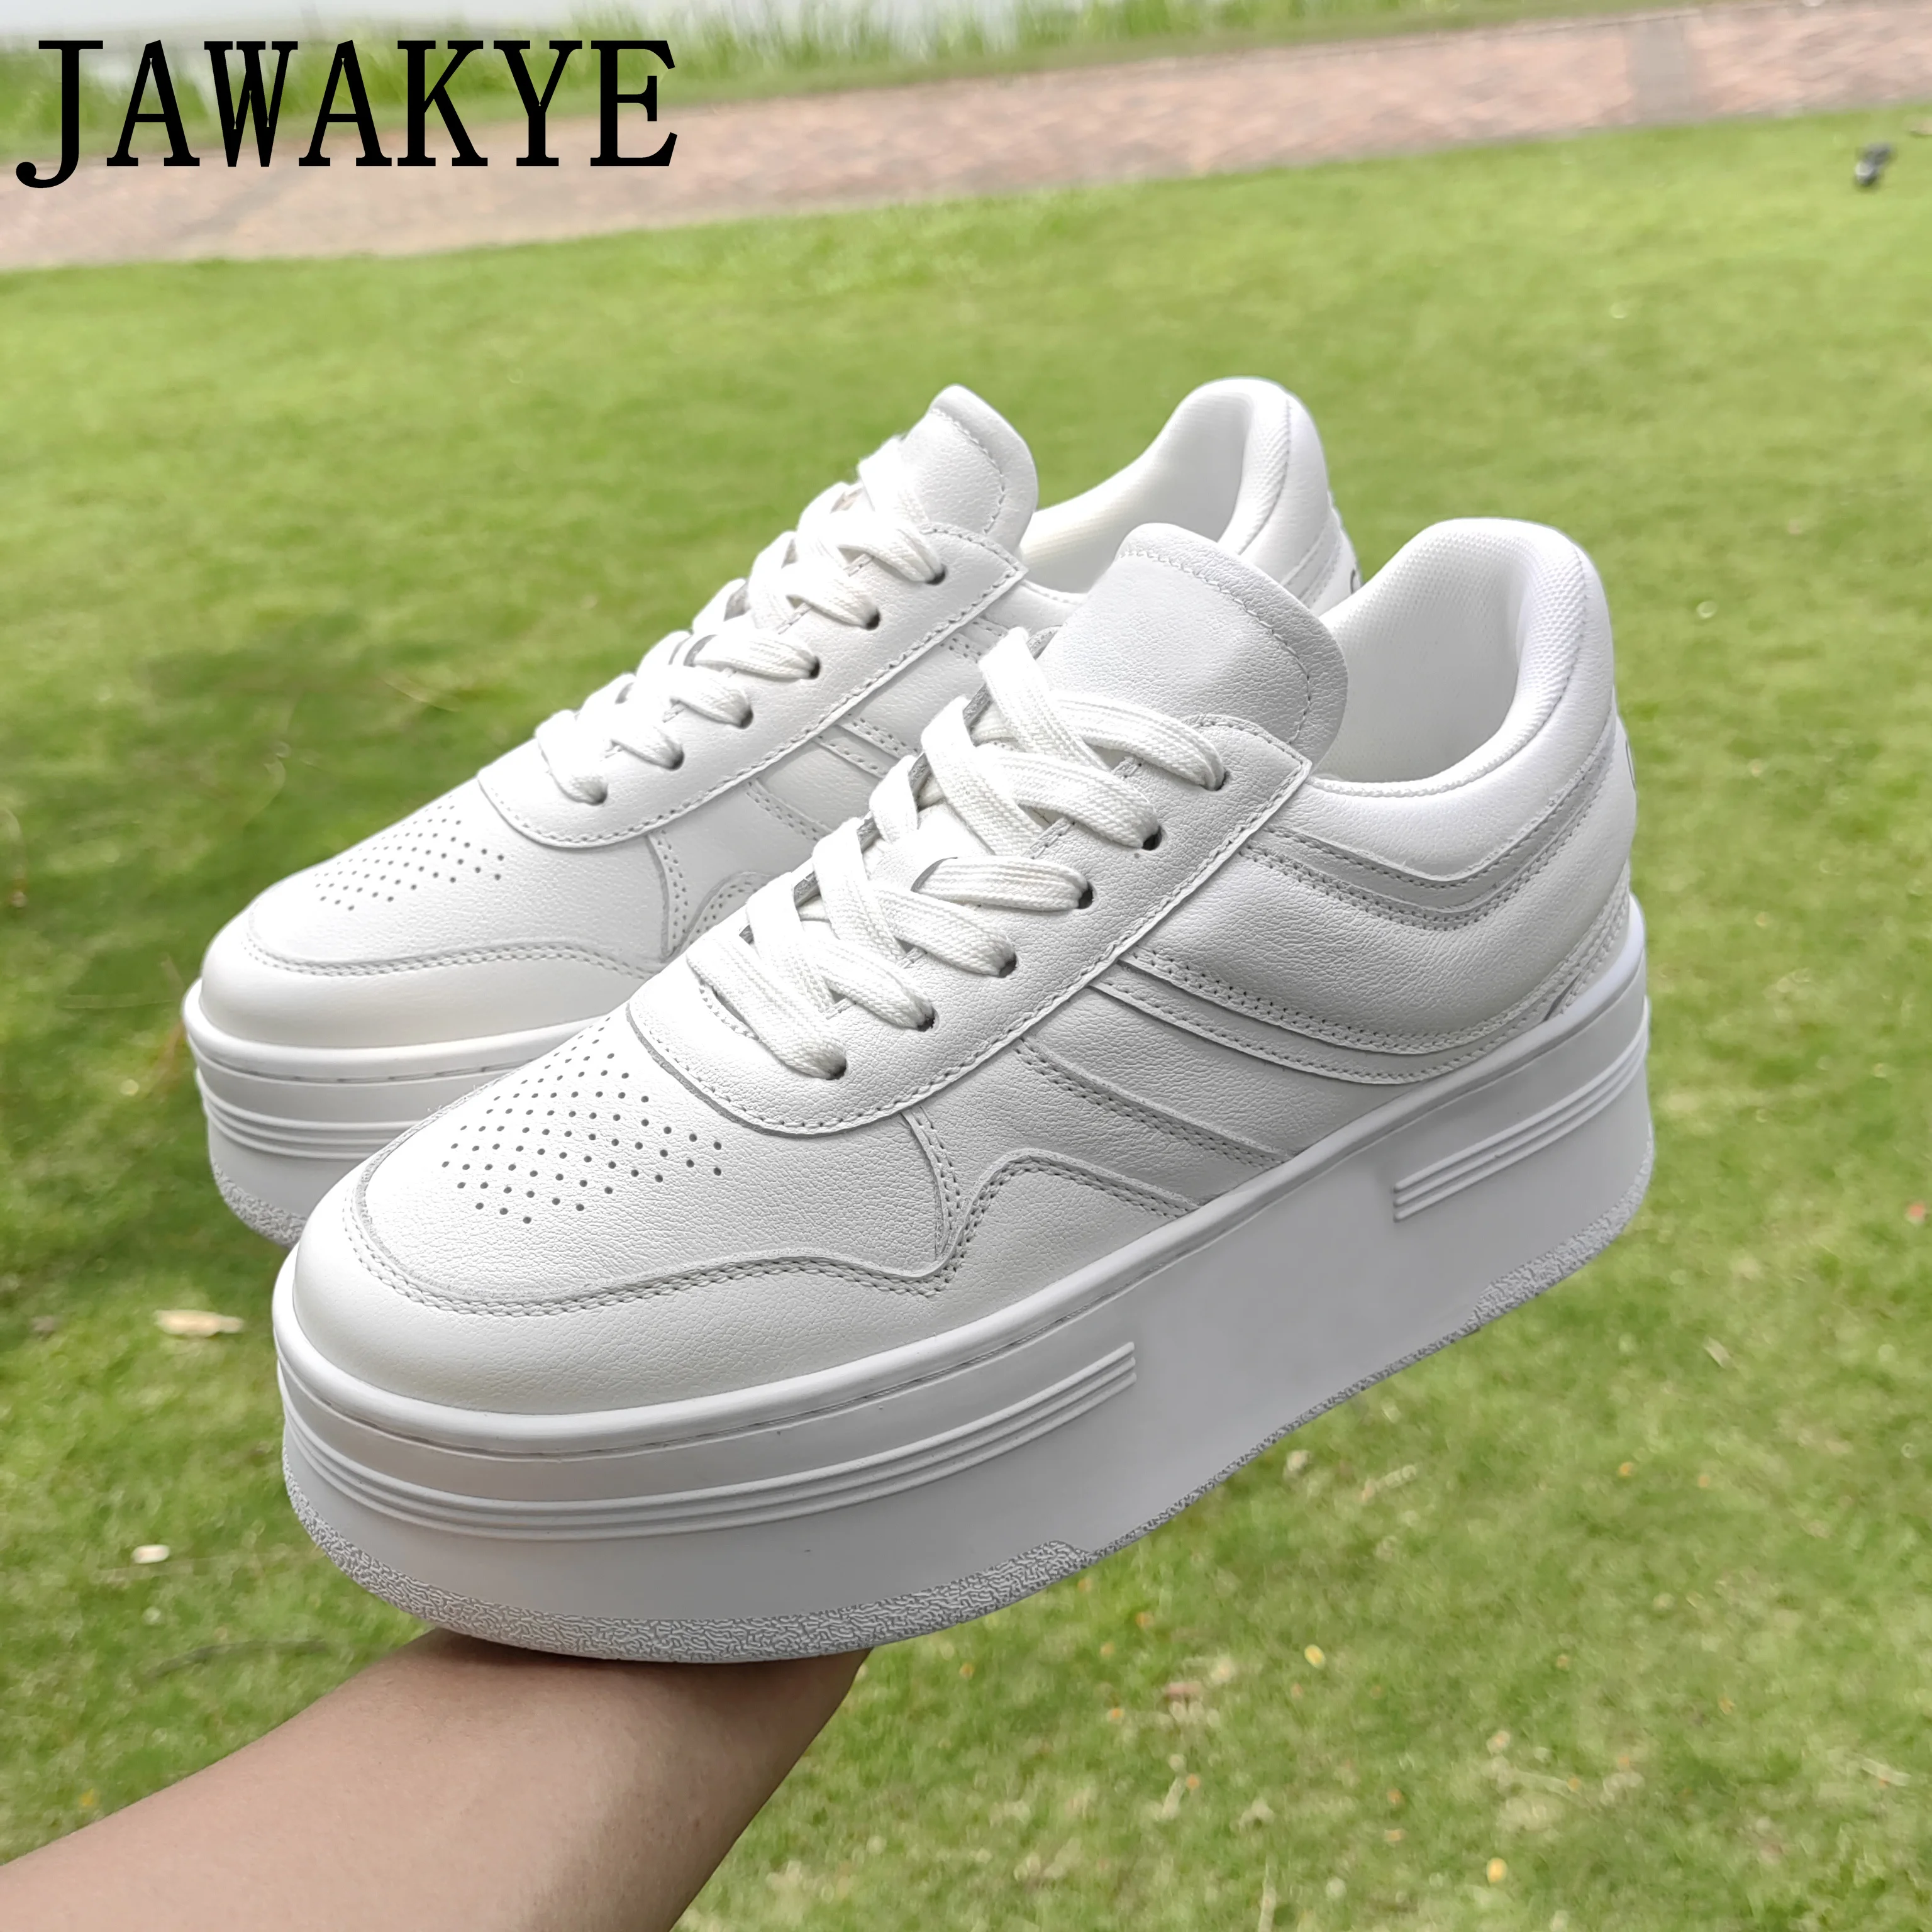 

Designer White Sneakes Women's Trainers Platform Thick Sole Ladies Sneakers Lace Up Leather Causal Shoes Runner Walking Shoes